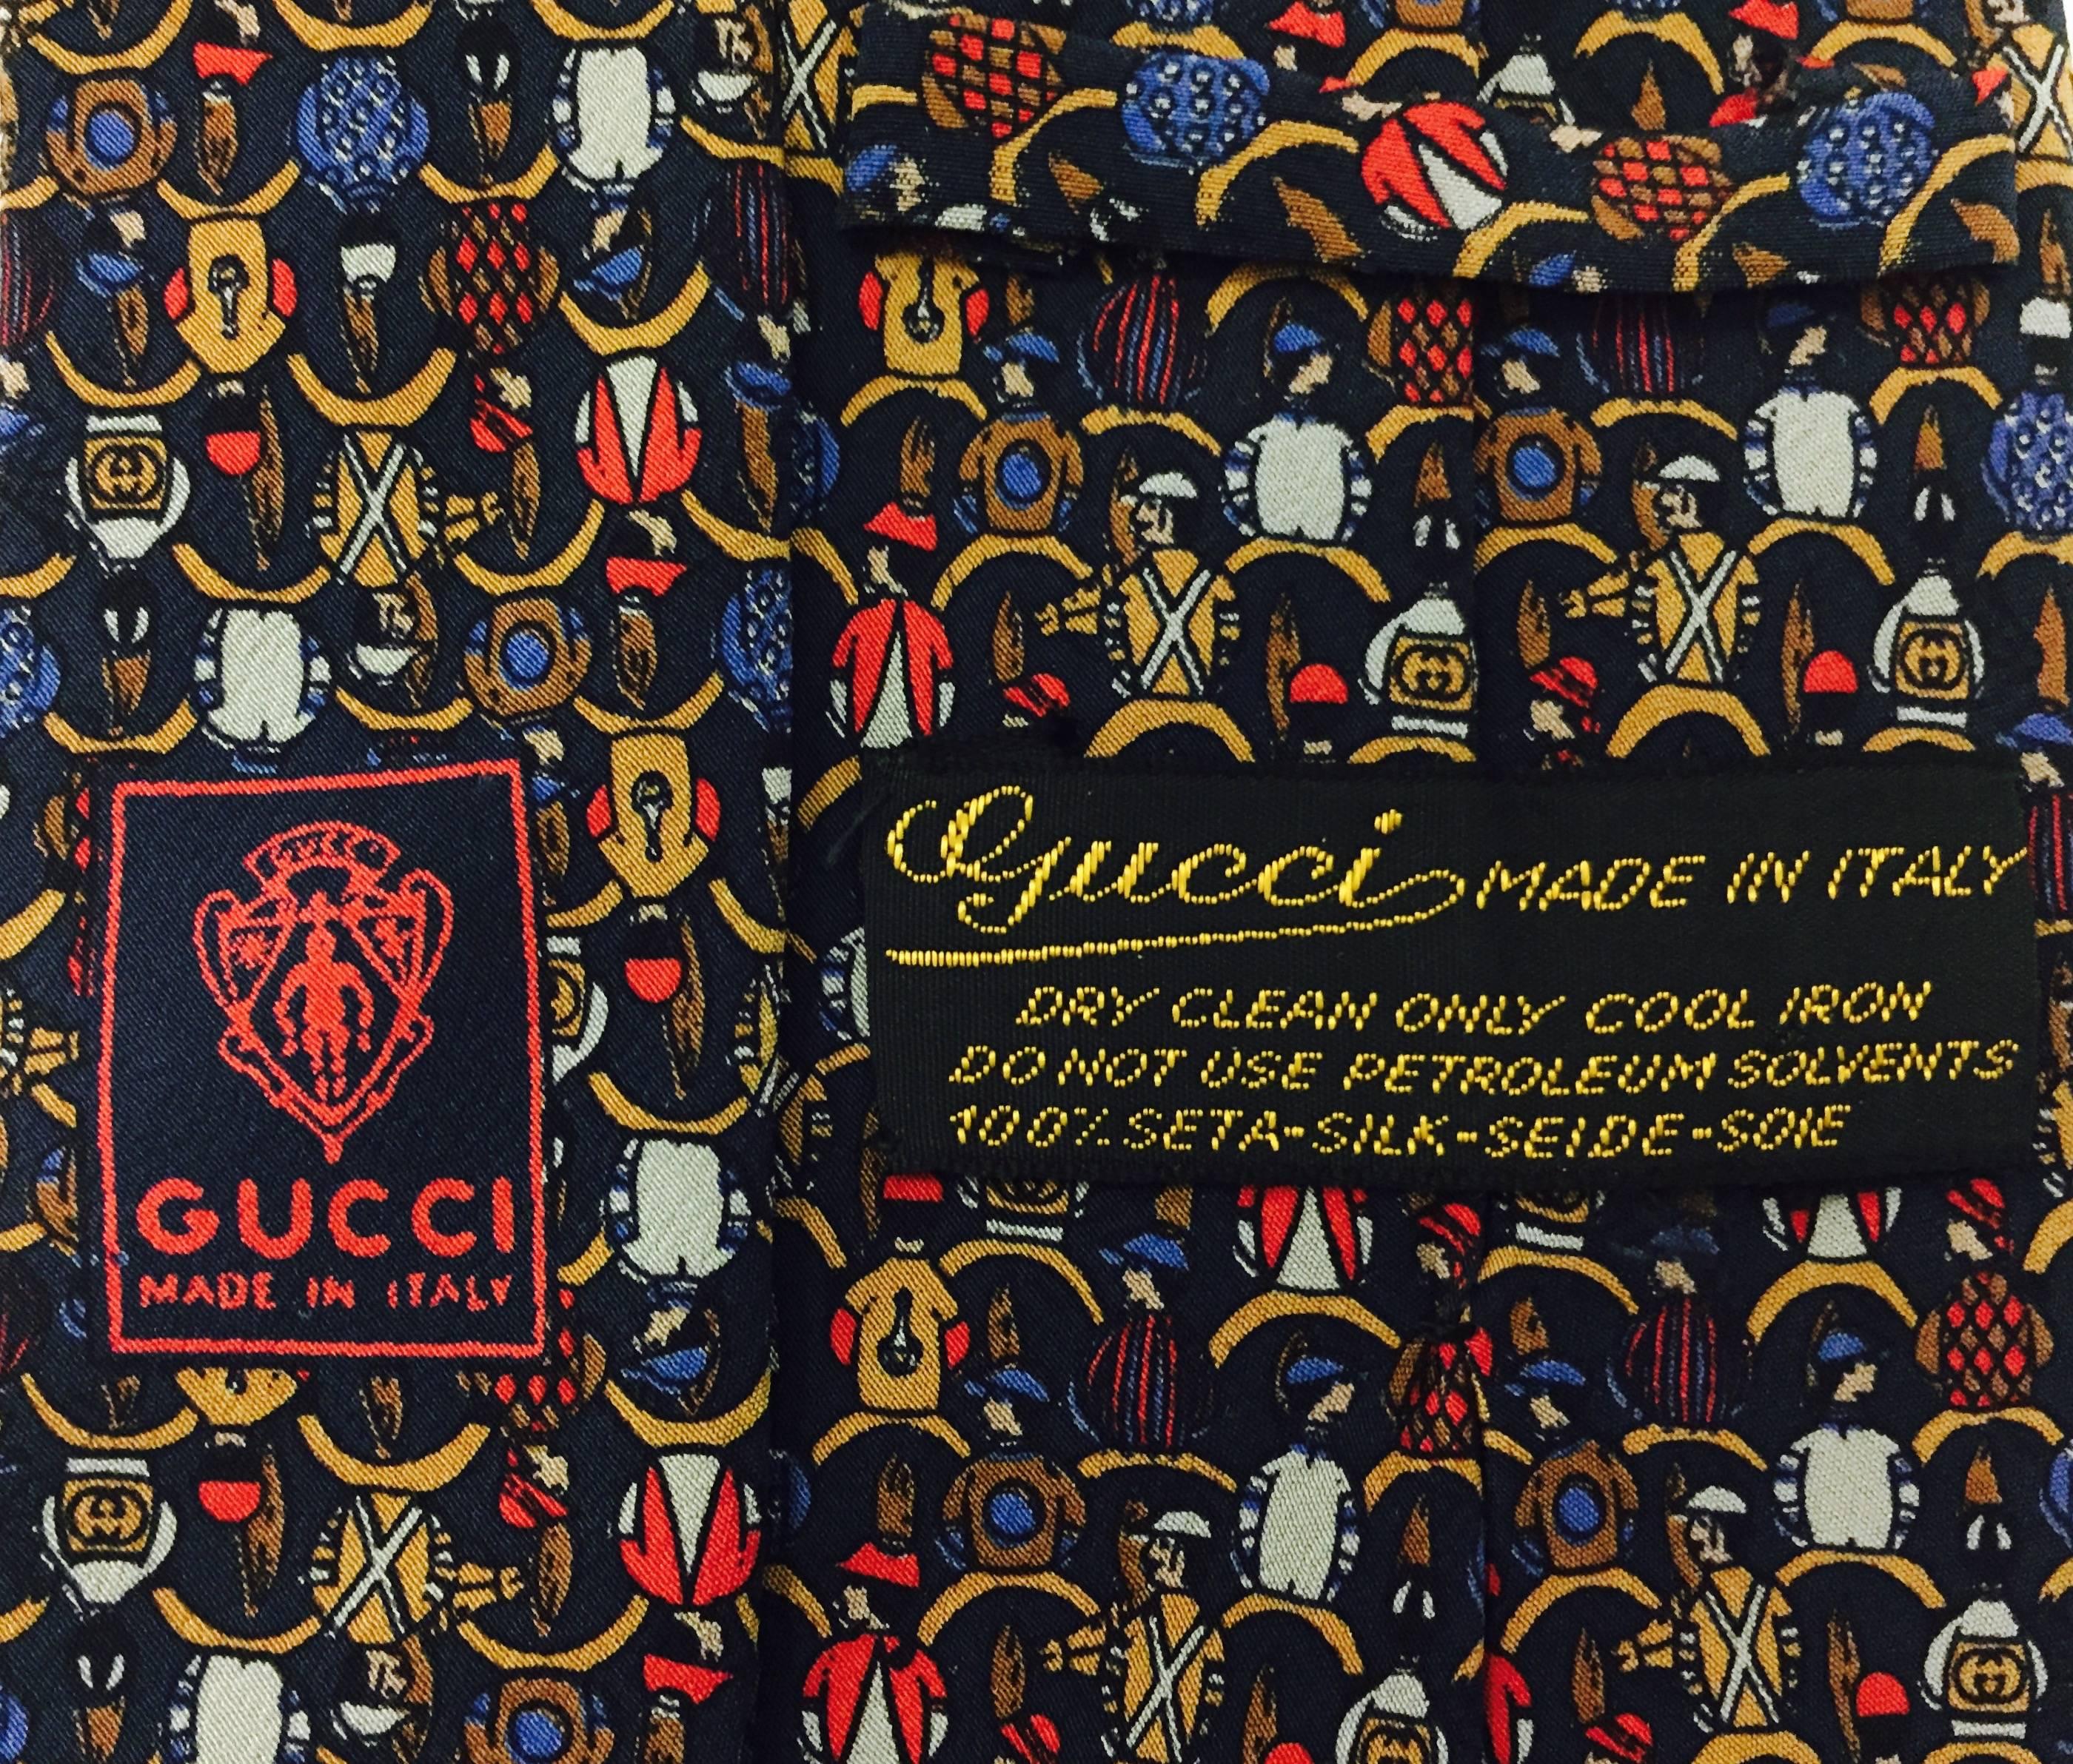 Men's vintage Gucci necktie is perfect for the race fans who look forward to the Triple Crown of racing...The Kentucky Derby, the Preakness and Belmont races!   It takes a close look to see the whimsical pack of jockeys on their mounts as viewed